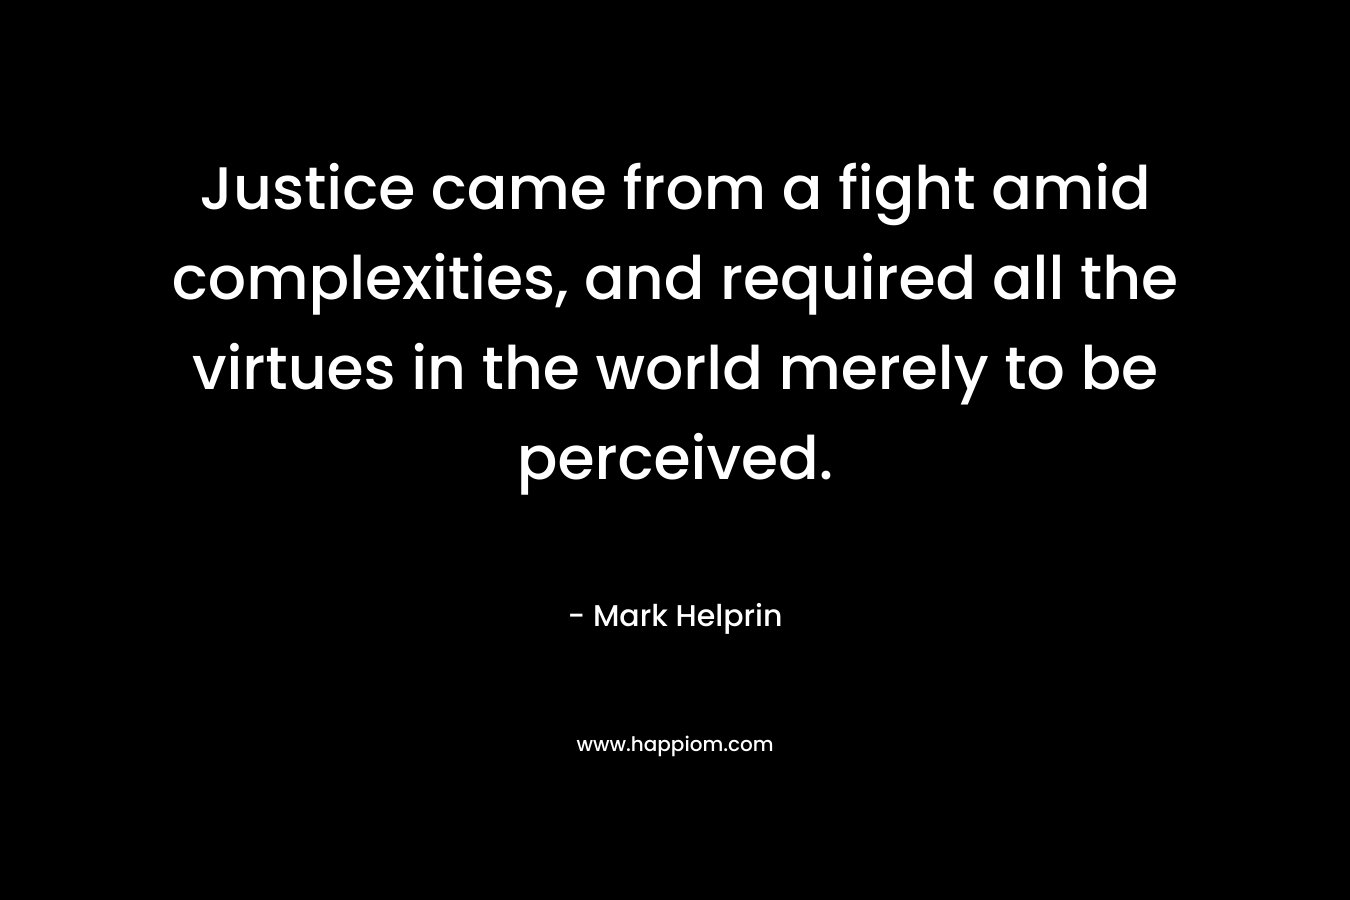 Justice came from a fight amid complexities, and required all the virtues in the world merely to be perceived. – Mark Helprin